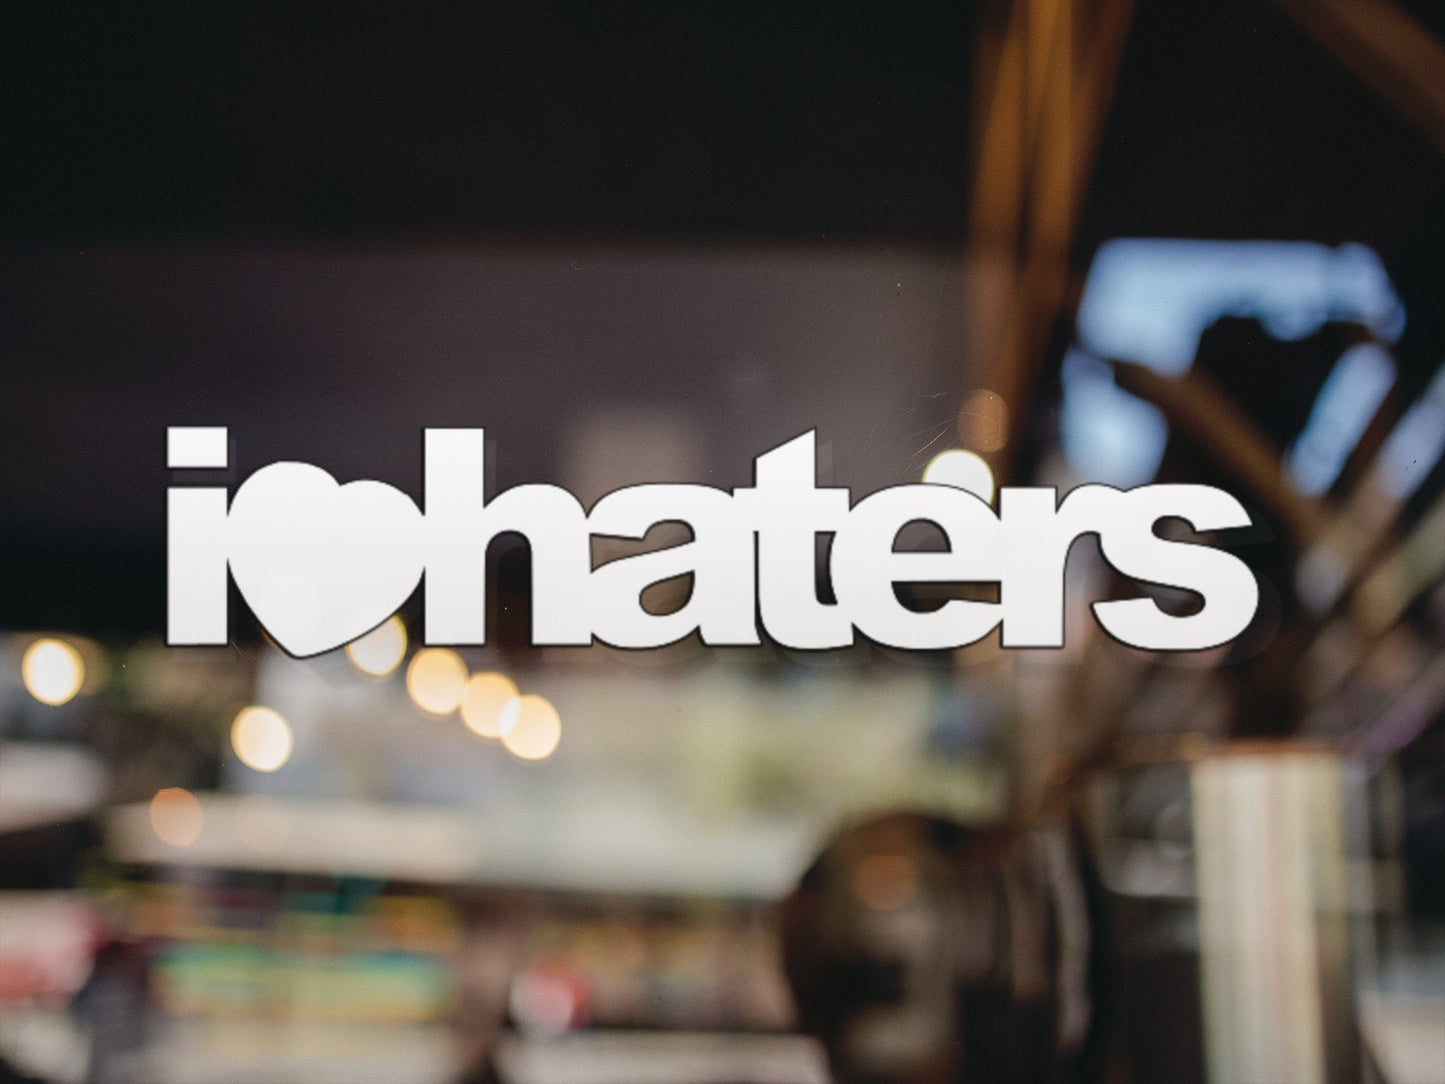 I Love Haters Decal - Many Colors & Sizes